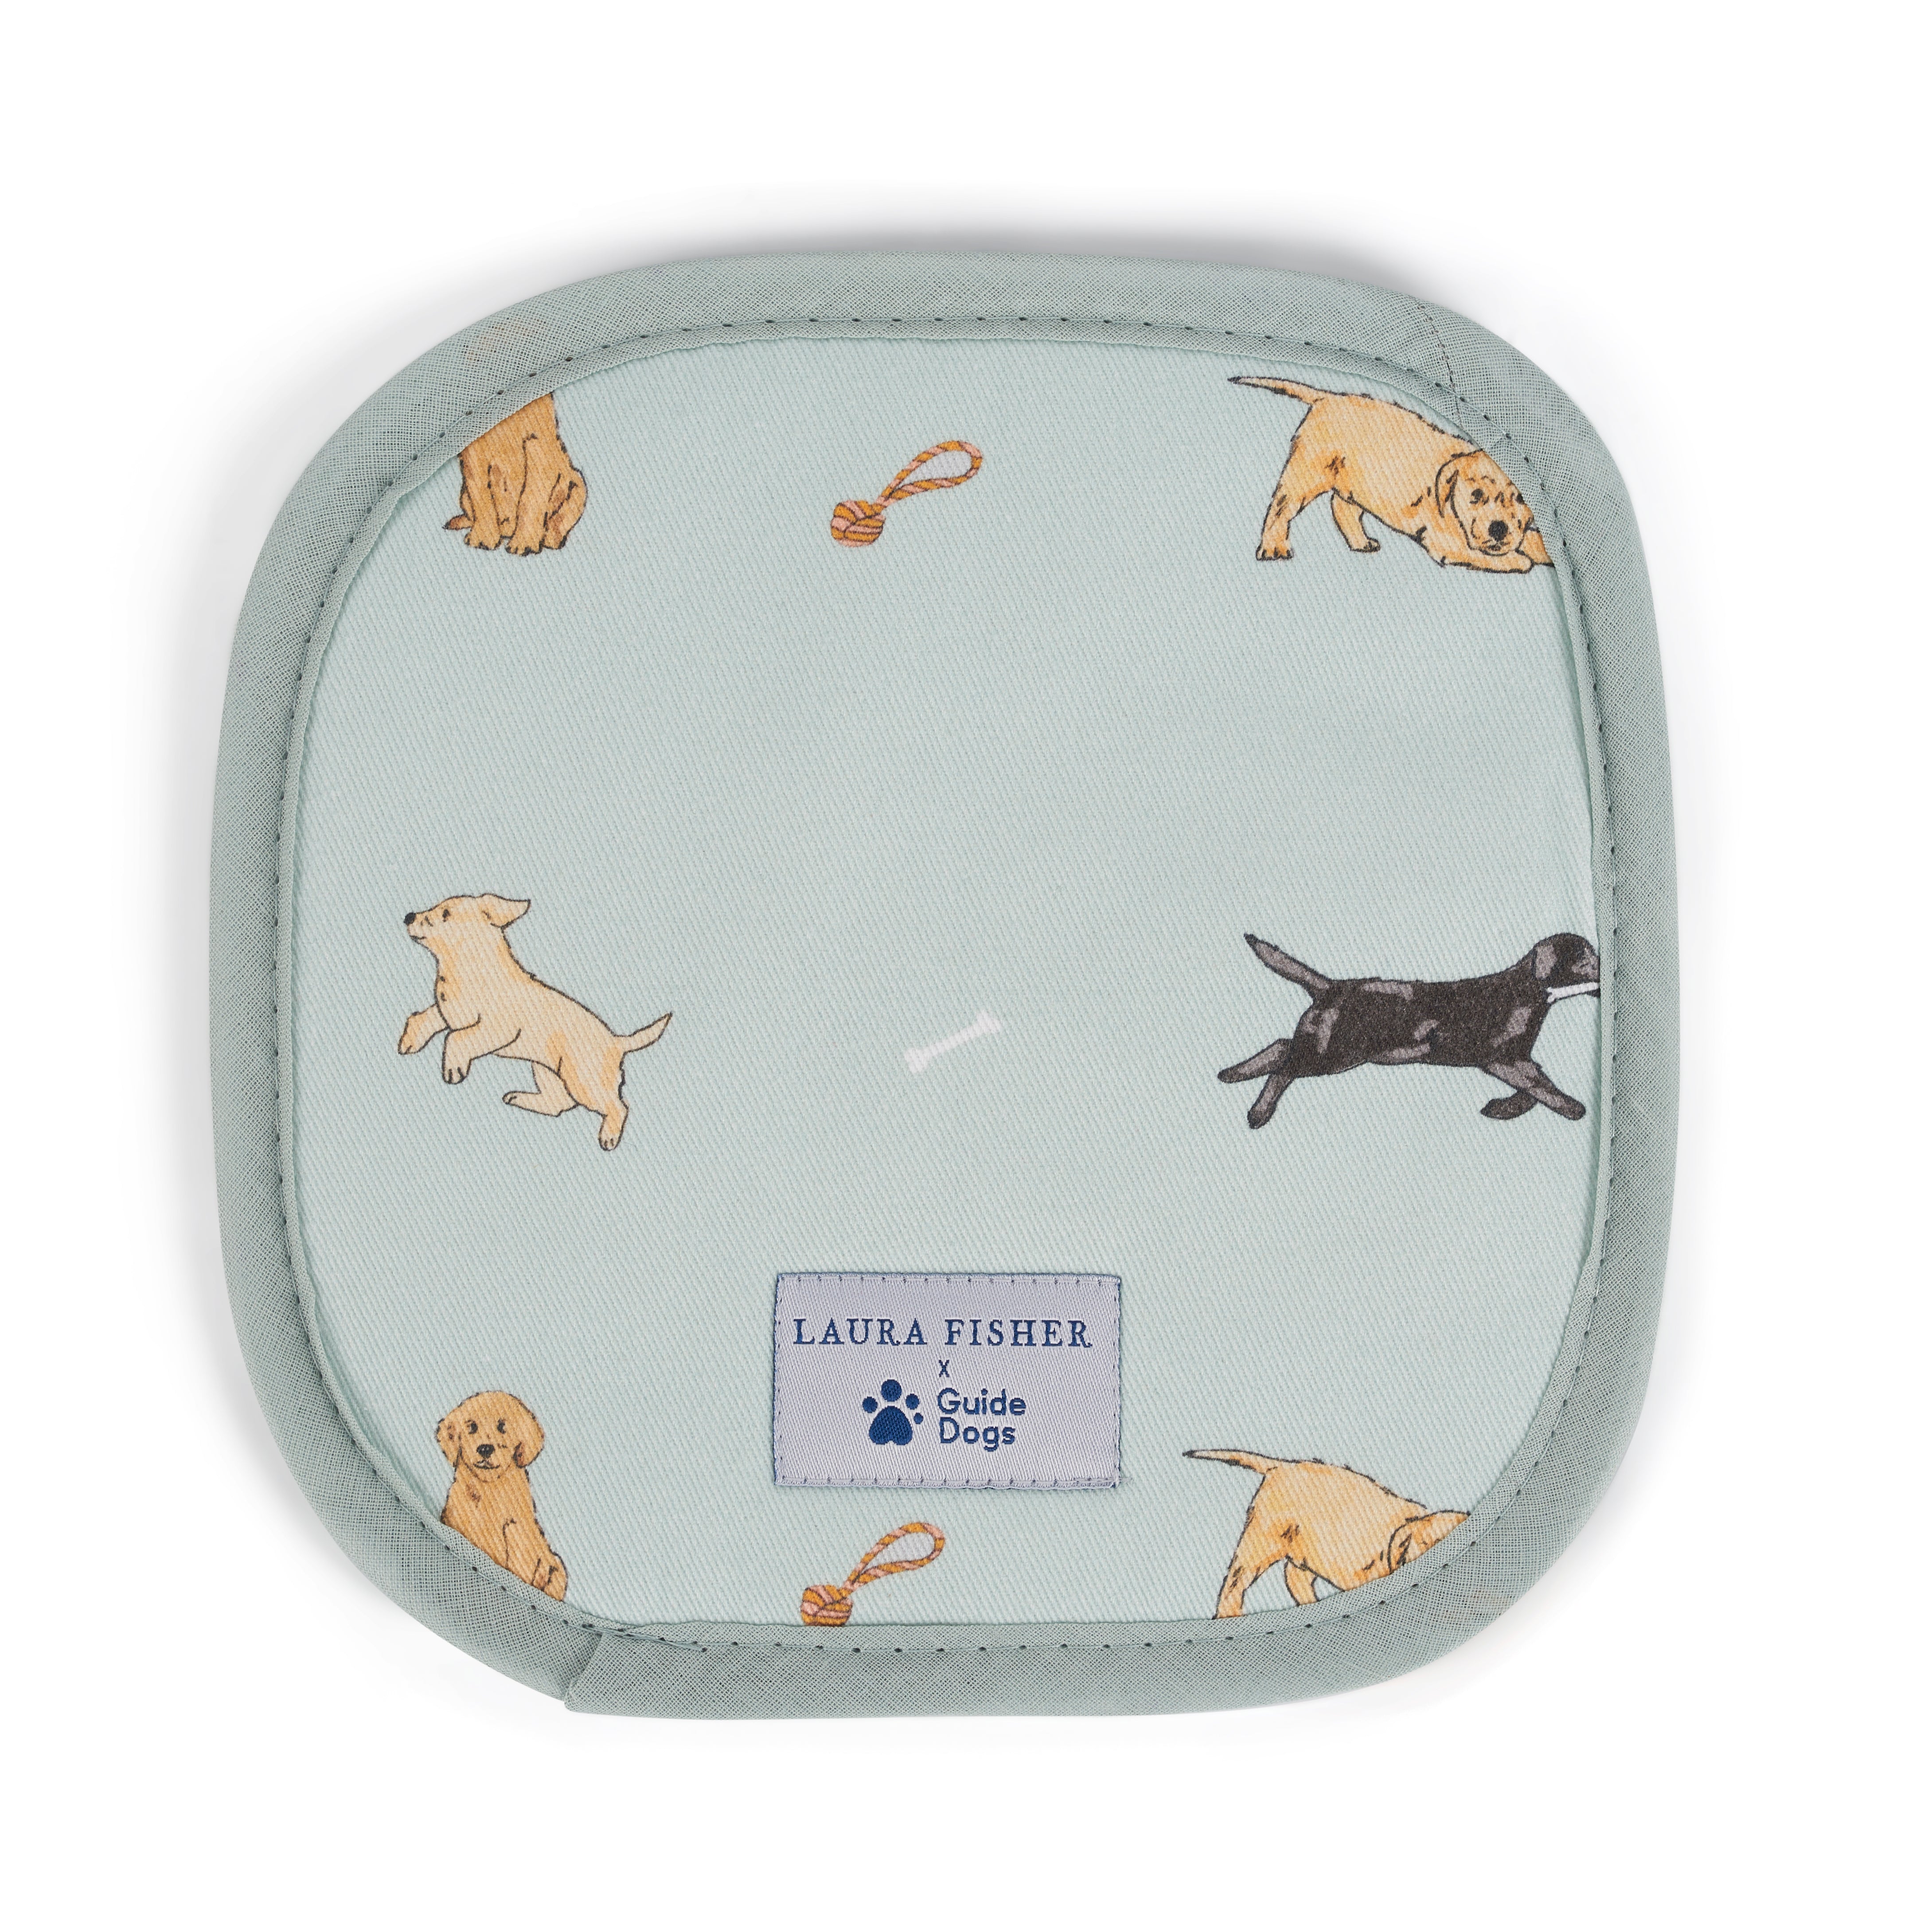 A pale blue pot grab with pattern of playing Labrador puppies and Guide Dogs label logo